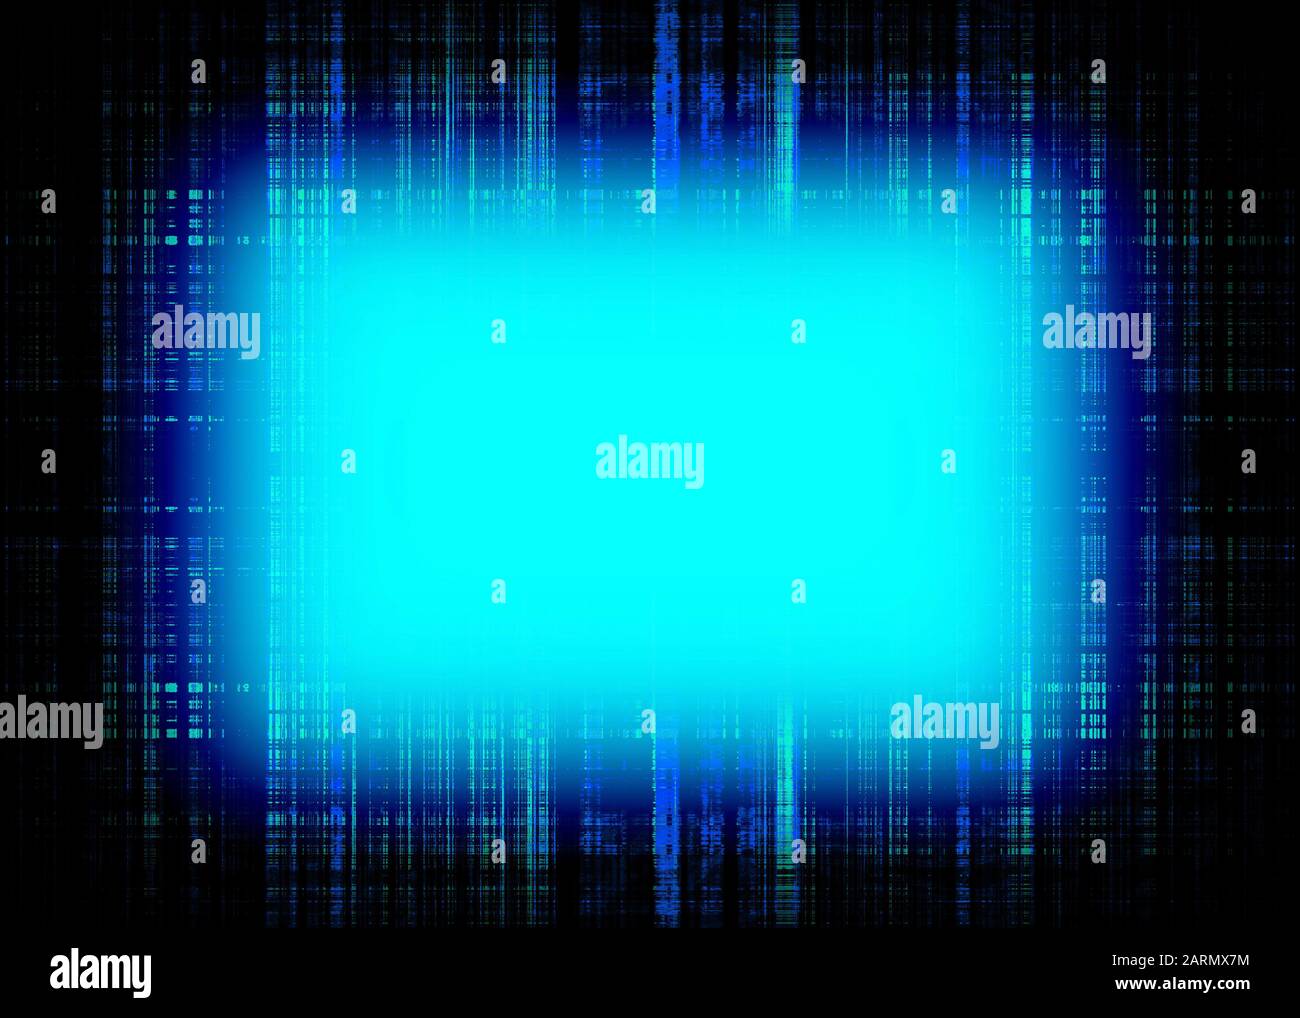 Glowing blue light frame with light blue copy space Stock Photo